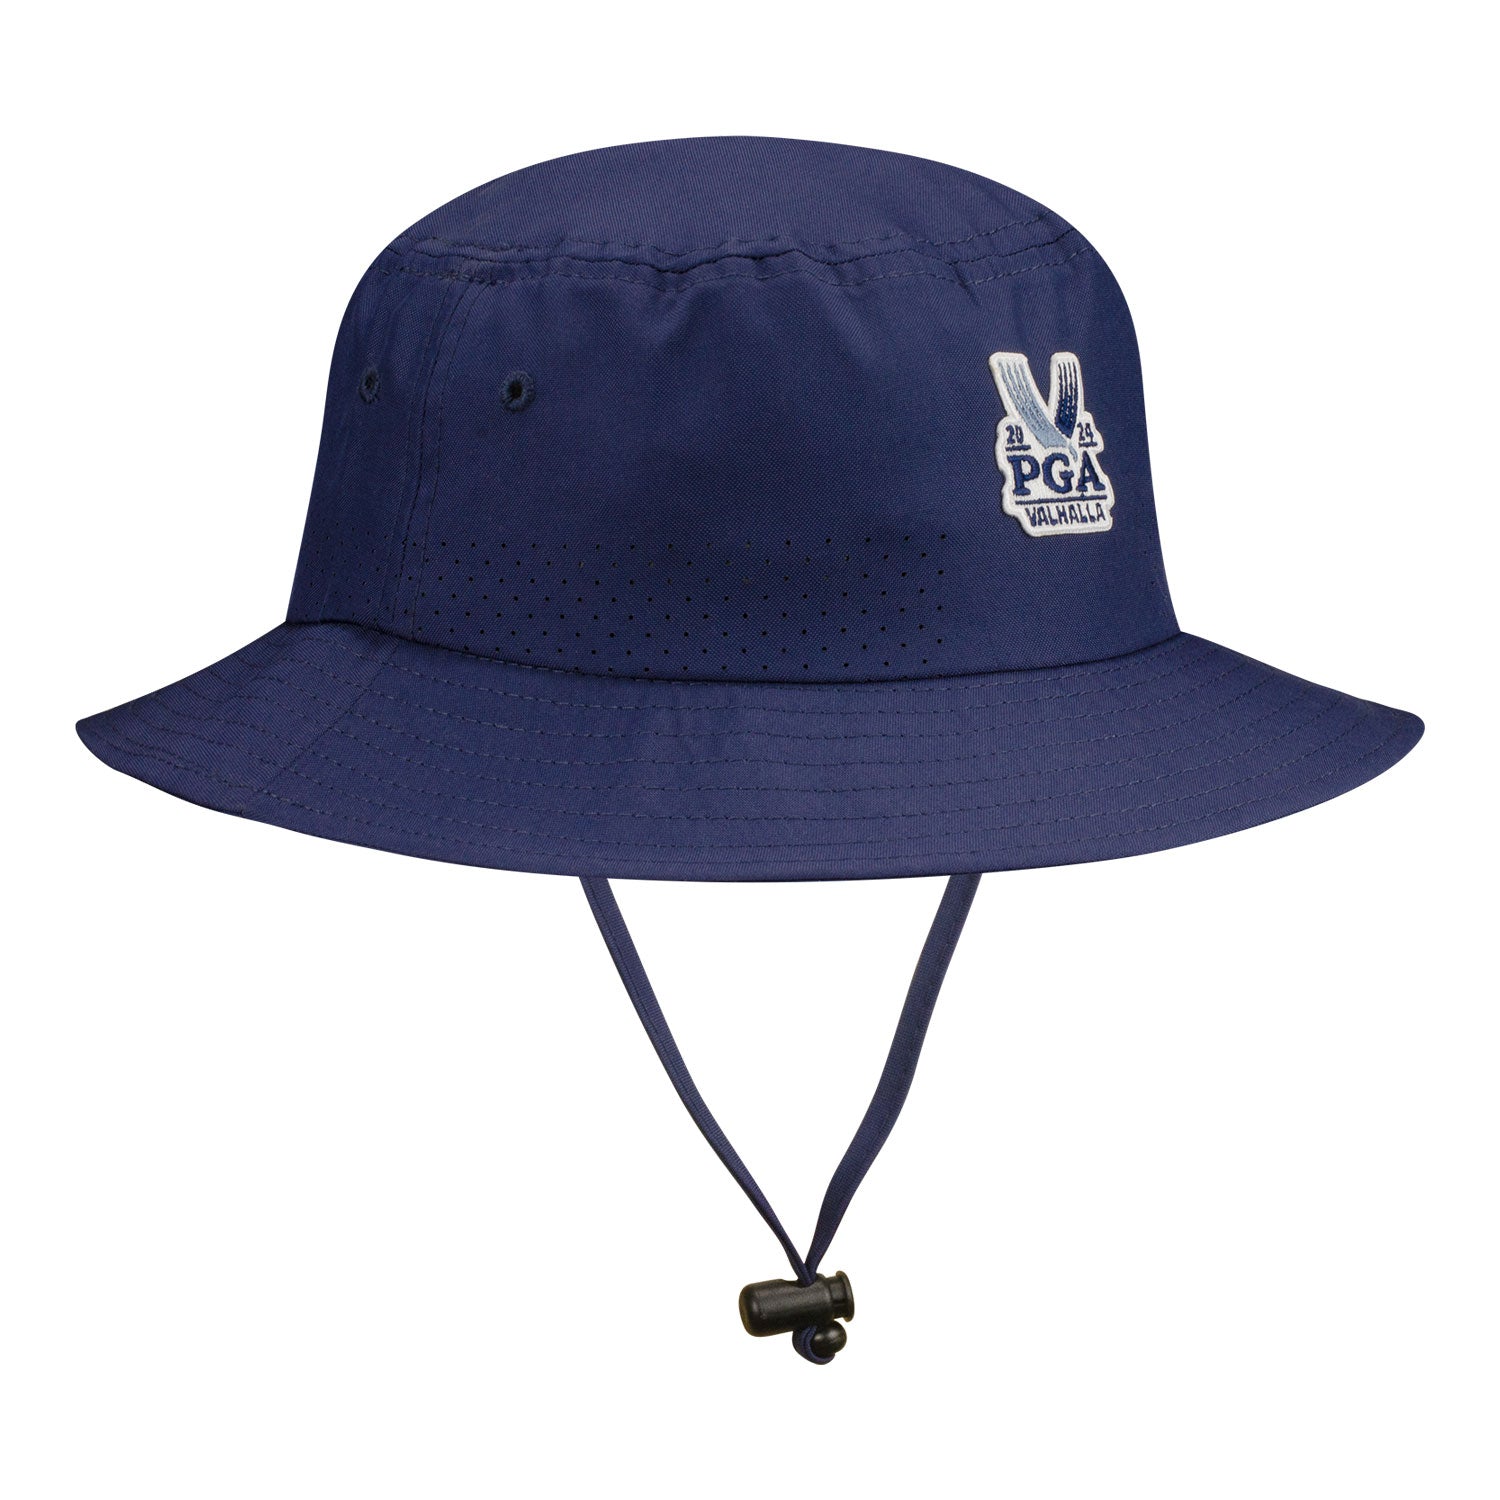 Imperial 2024 Pga Championship CC051 The Geysir Cooling Sun-Protection Bucket in Navy